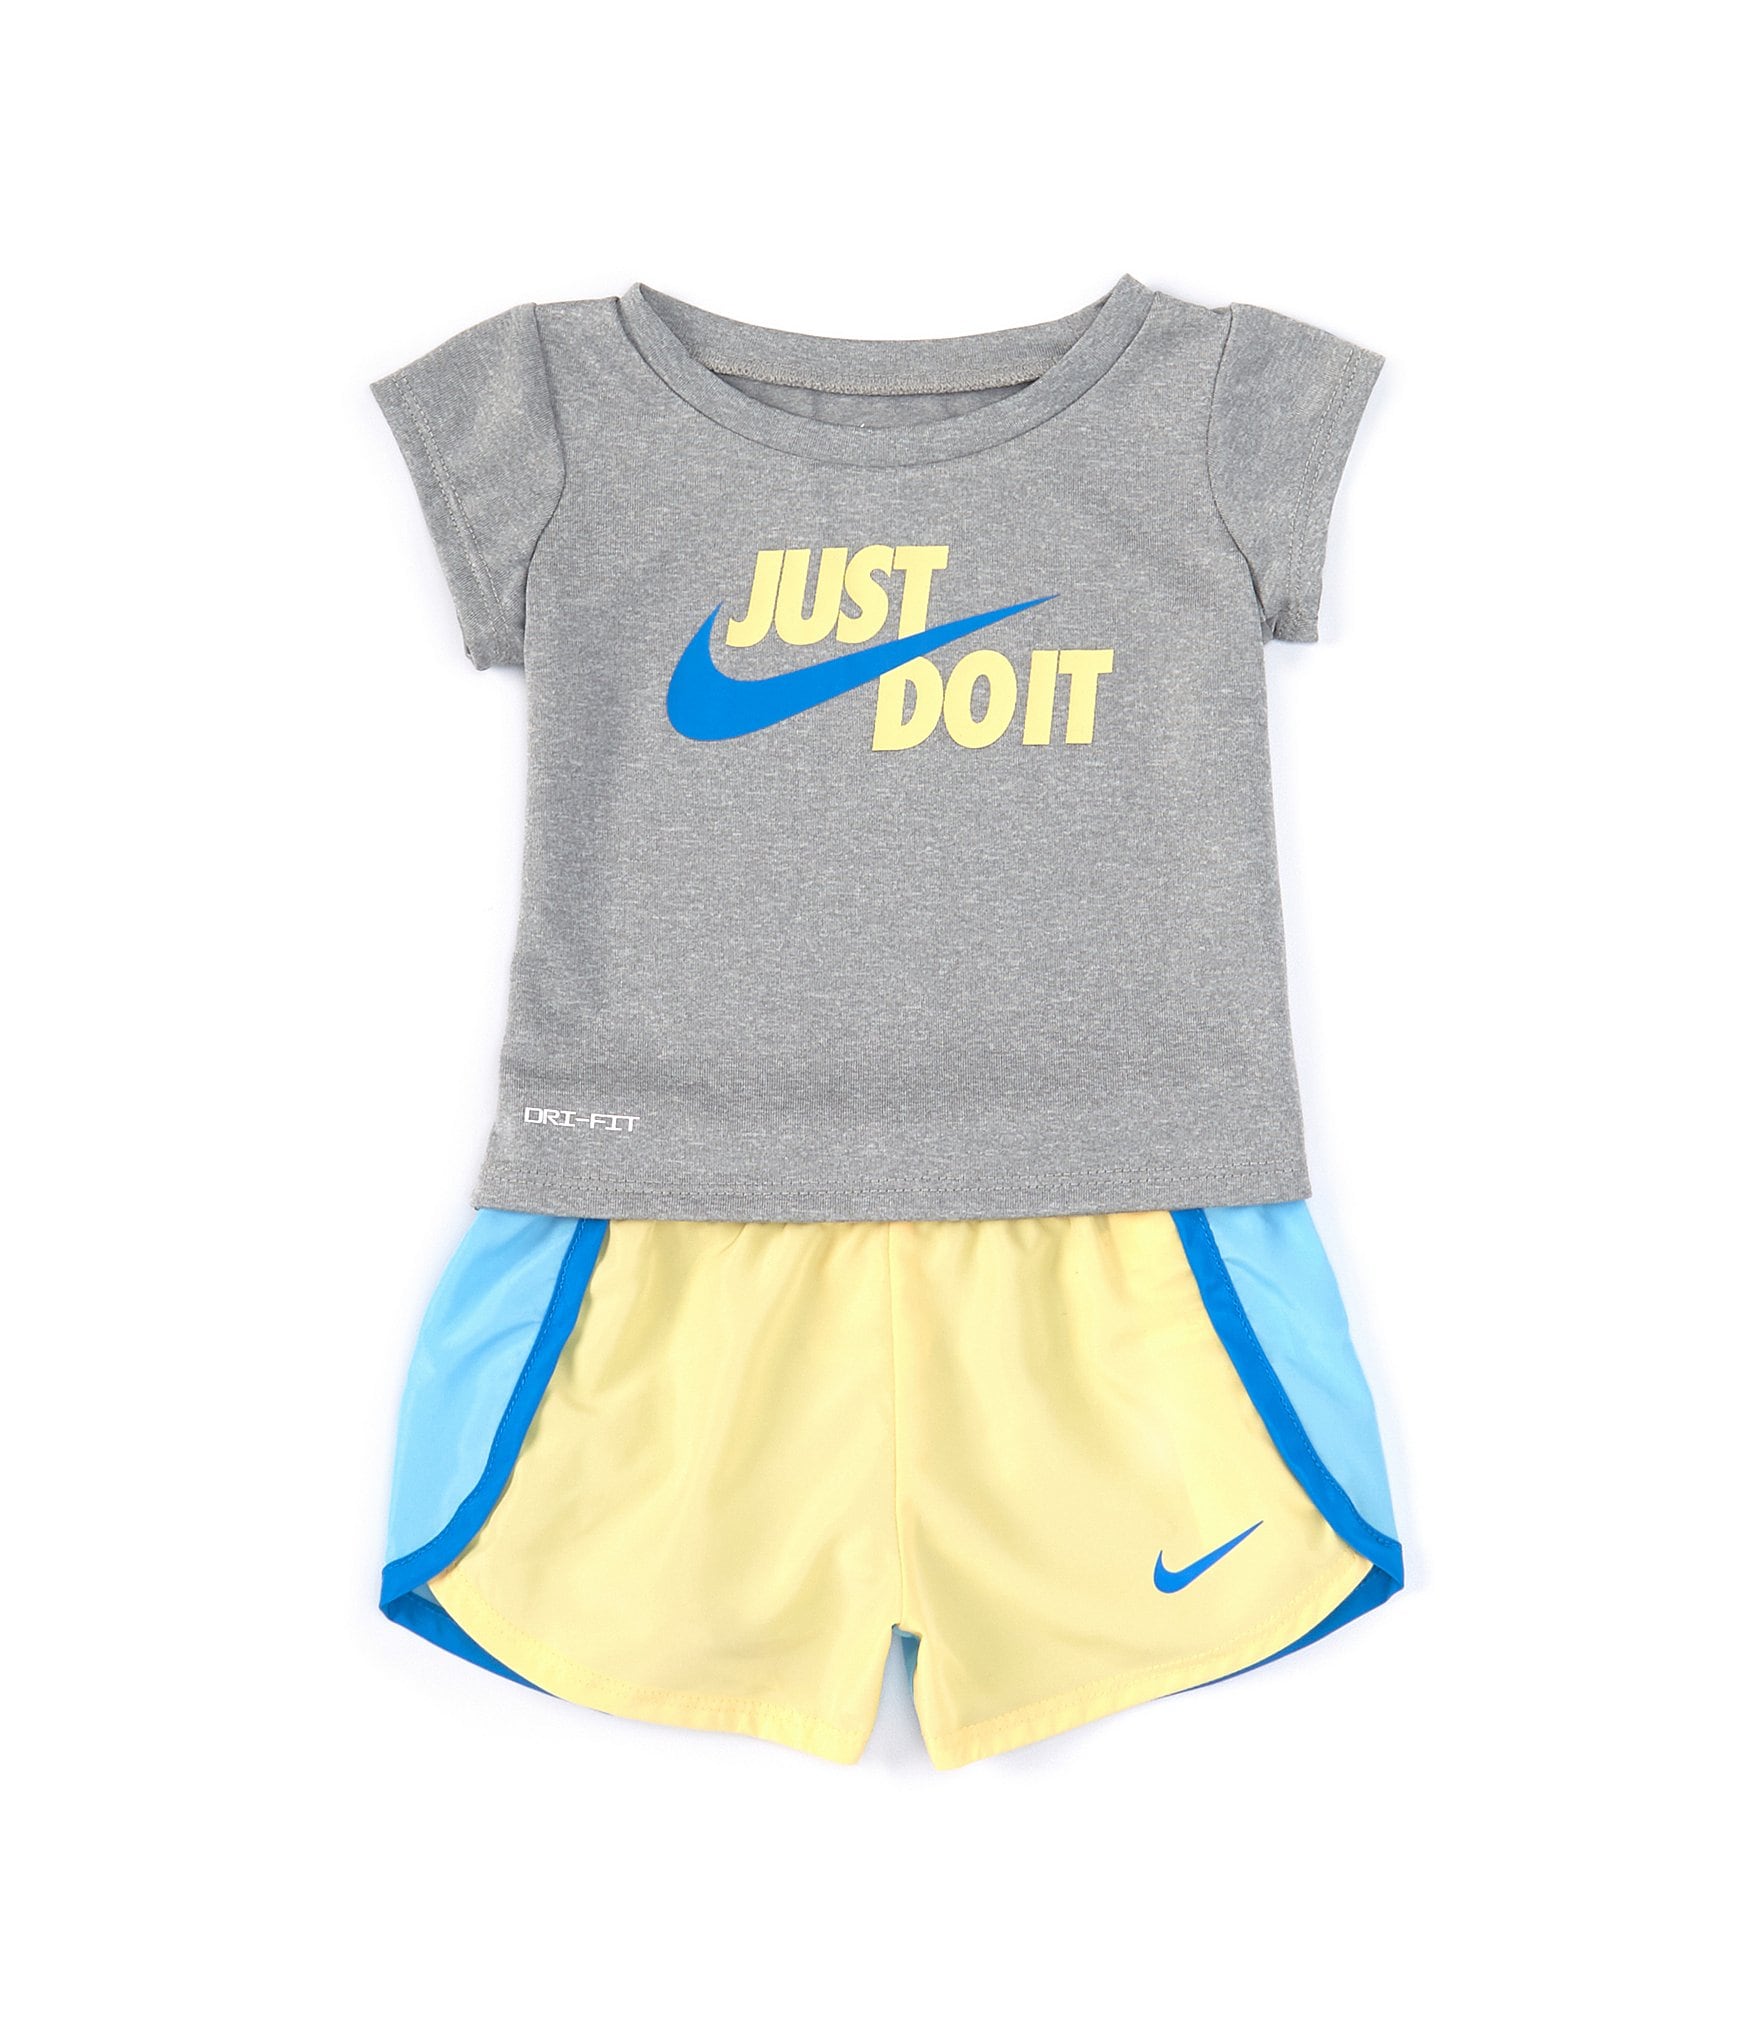 Nike Girls' Just Do It 2-Piece Shorts Set Outfit - Multi, 4